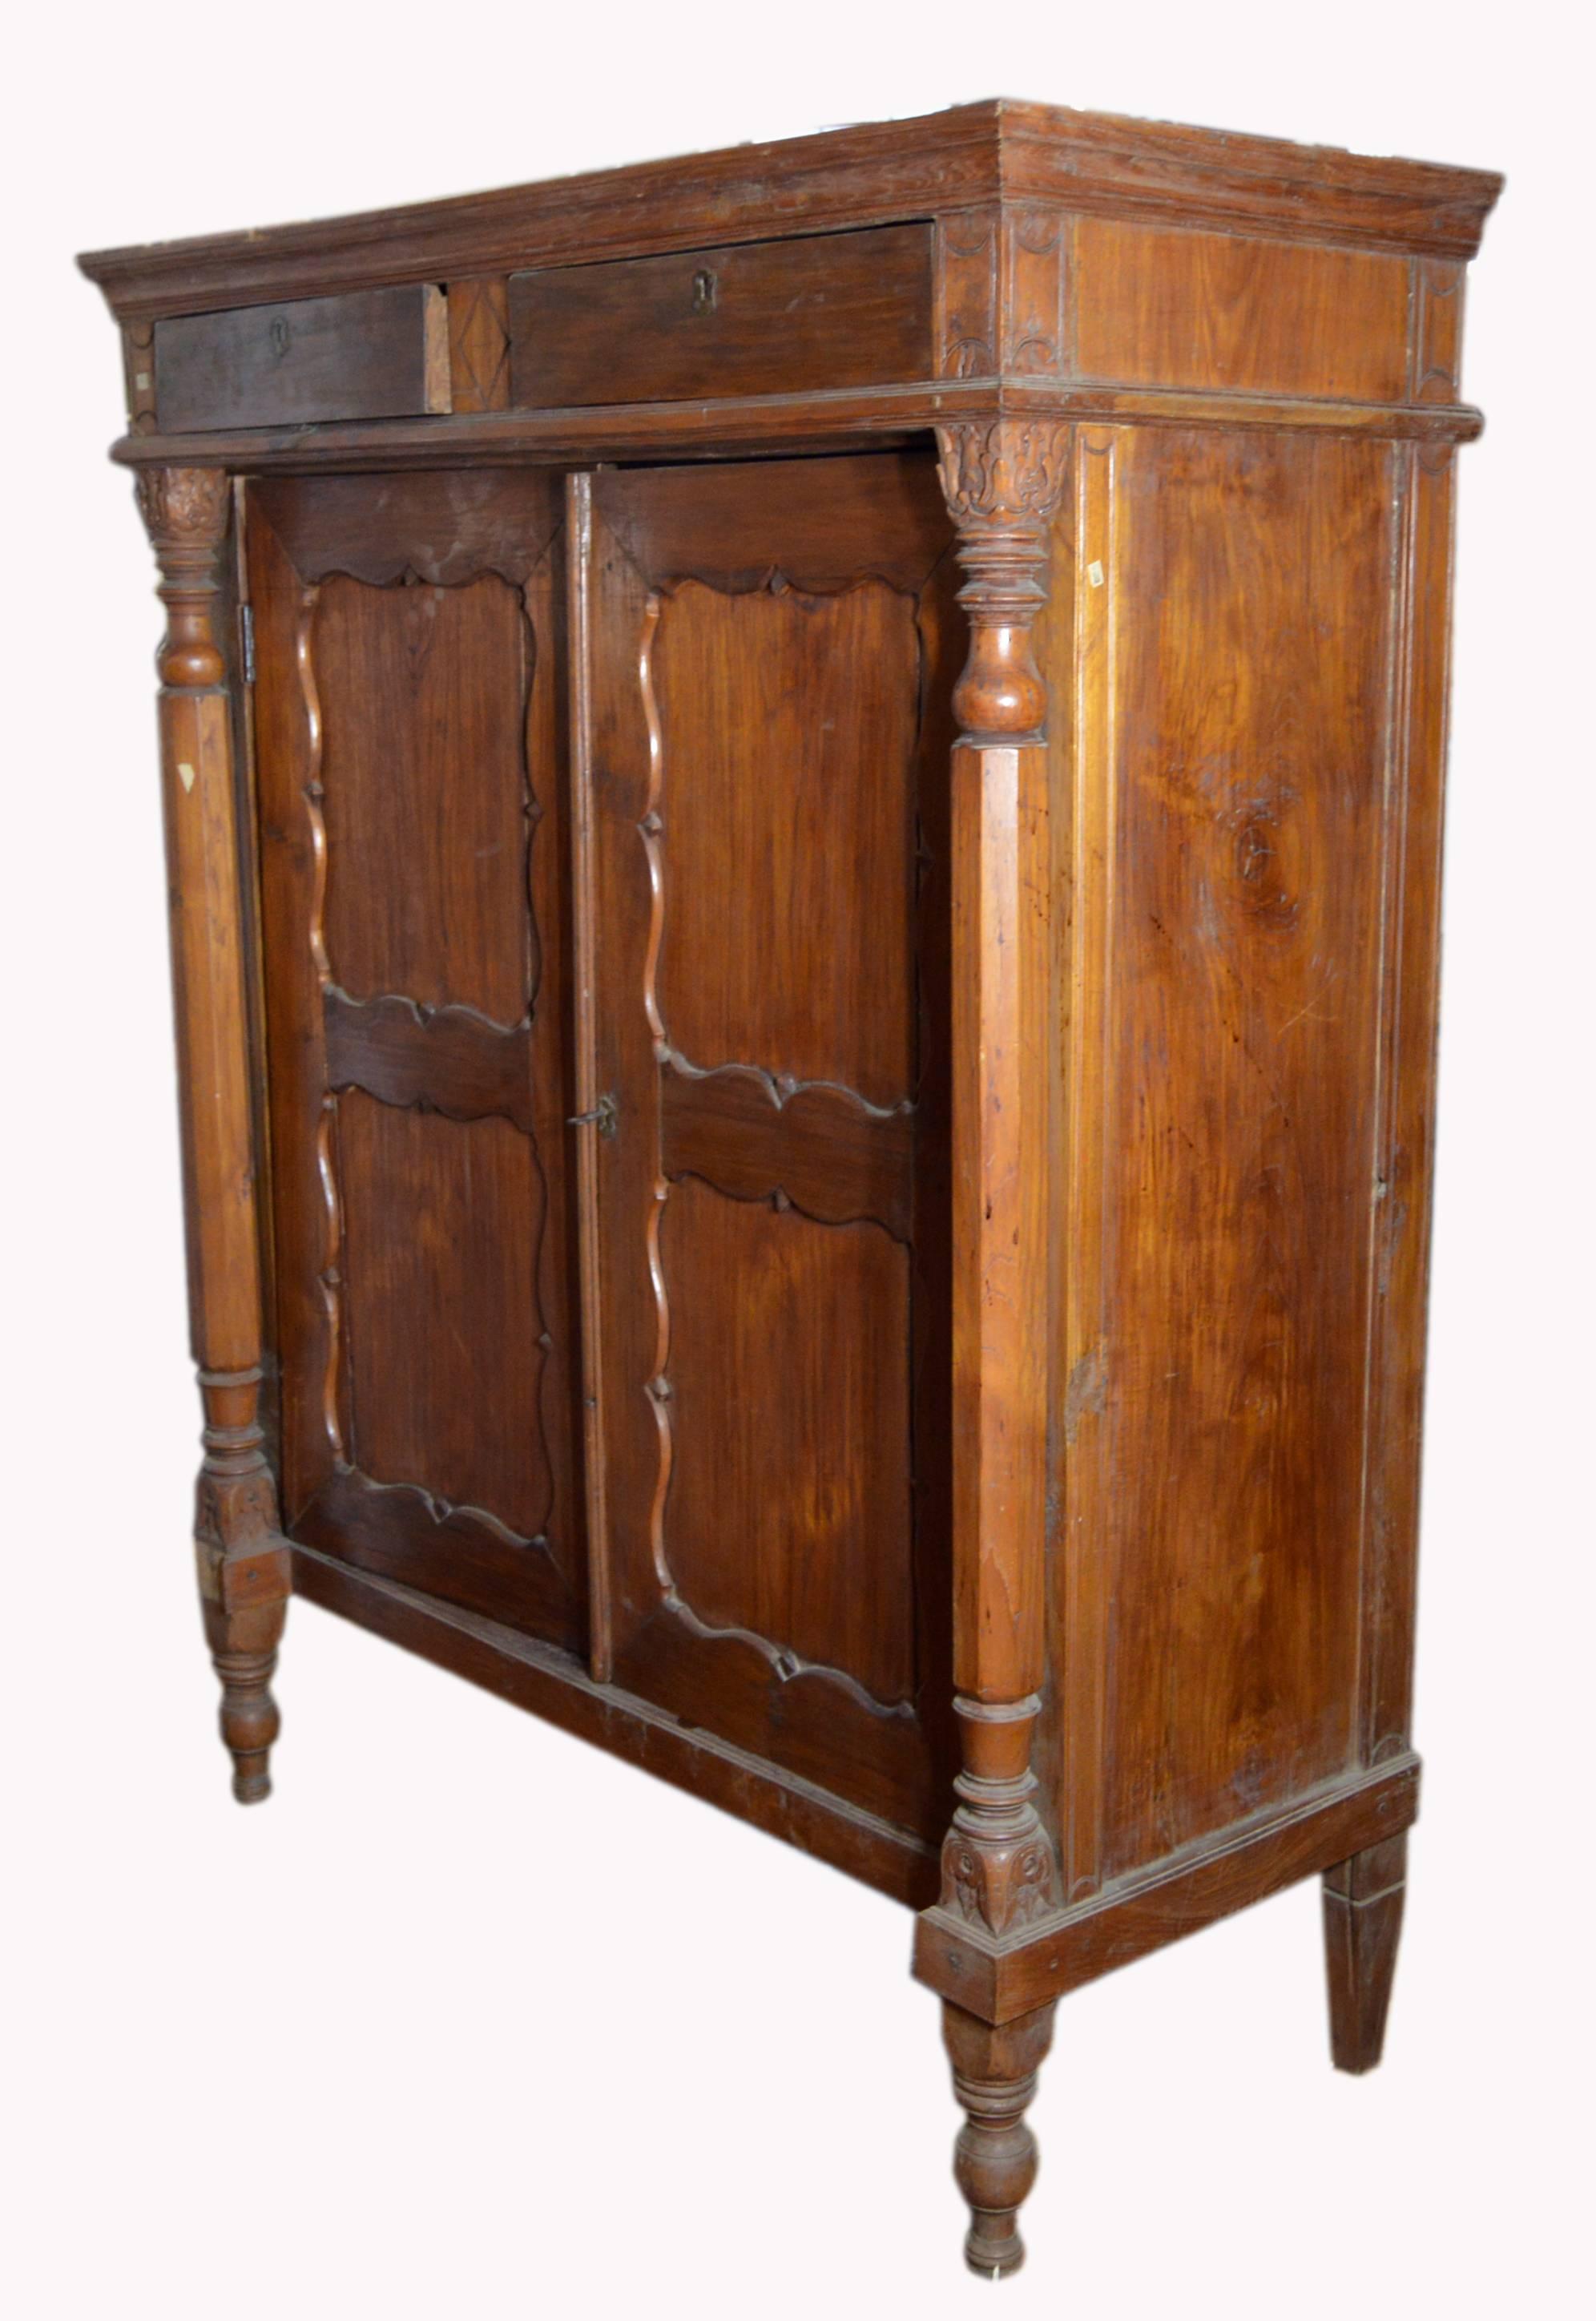 Wood 19th Century Dutch Colonial Lacquered Armoire with Columns and Paneled Doors